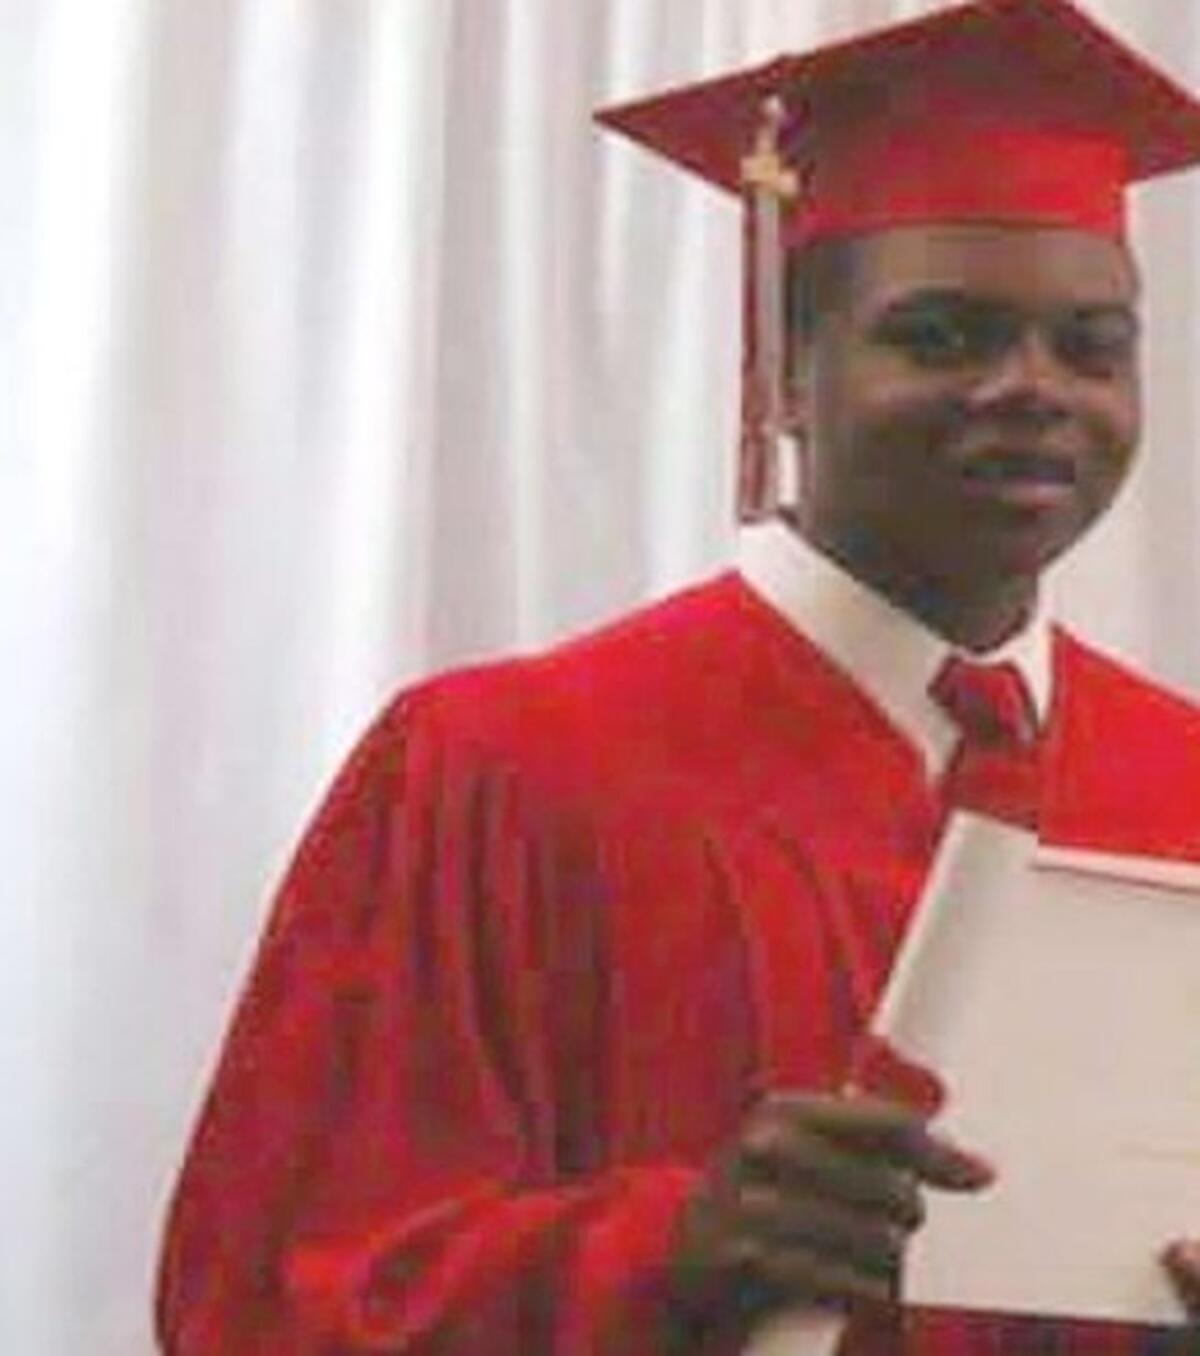 Laquan McDonald was shot 16 times in Chicago. (TNS)